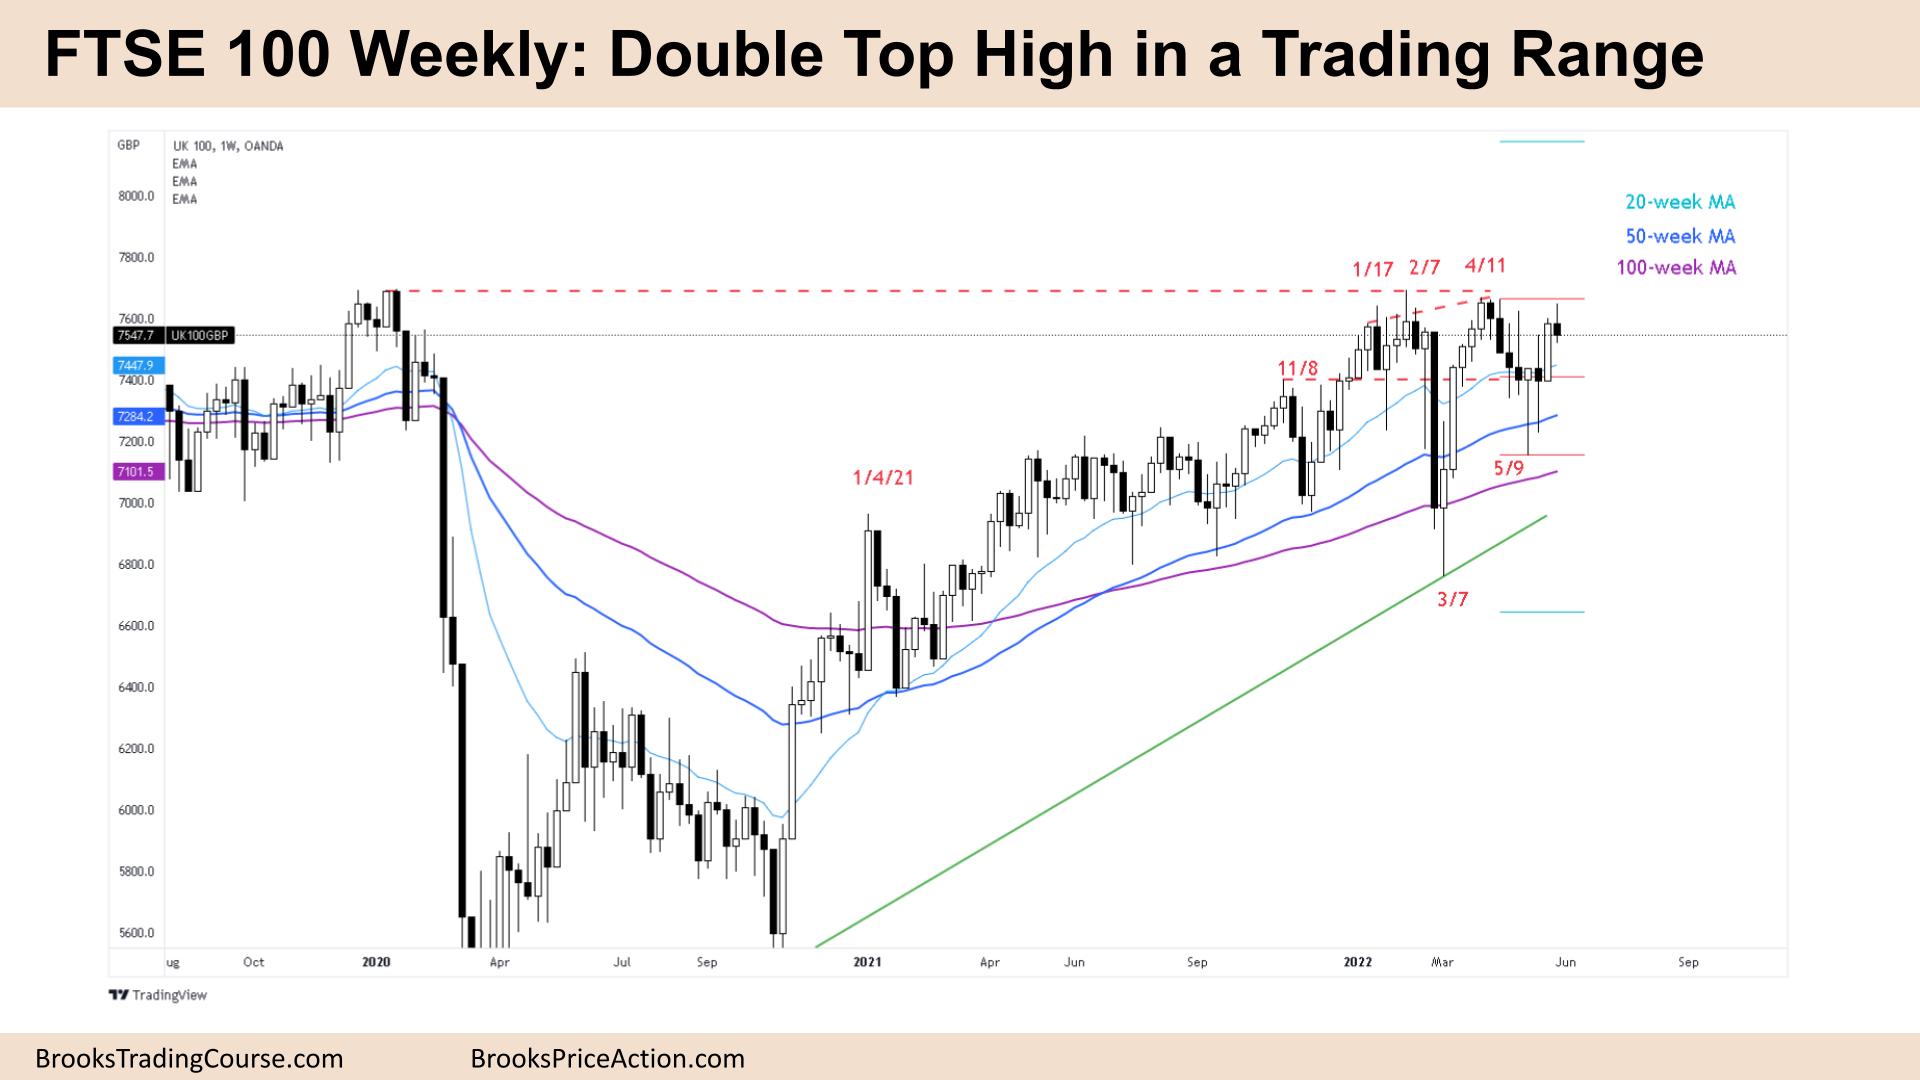 FTSE 100 Weekly Chart Double Top High in a Trading Range